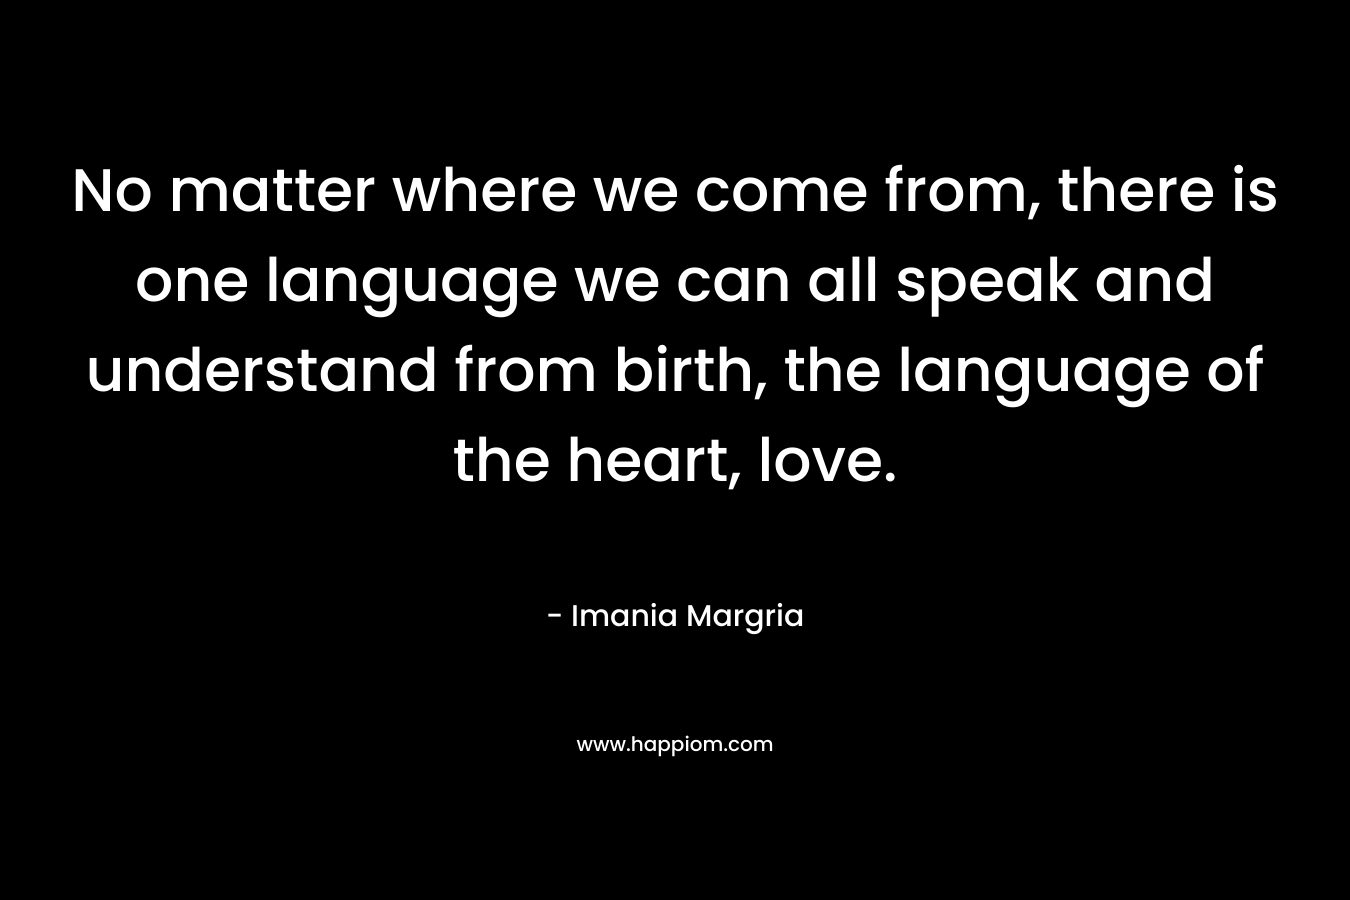 No matter where we come from, there is one language we can all speak and understand from birth, the language of the heart, love.